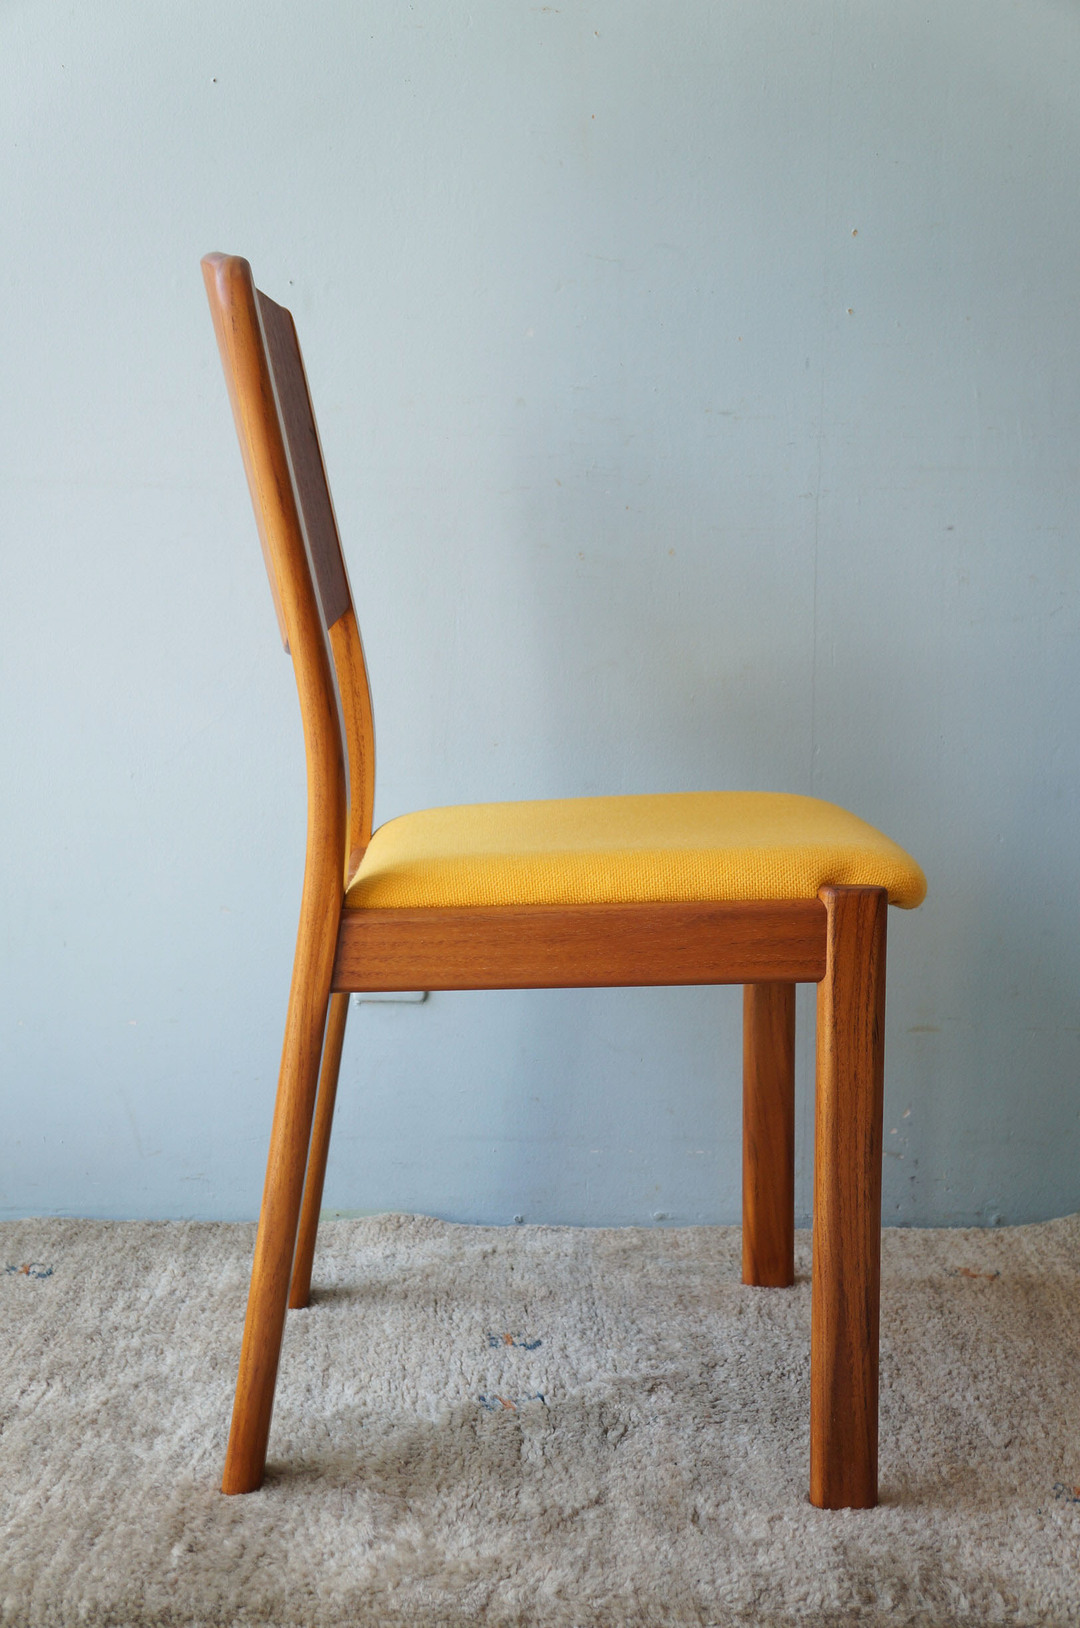 Danish Vintage Dining Chair Koefoeds Hornslet/デンマークヴィンテージ ダイニングチェア コフォード ホーンスレット 椅子 チーク材 北欧モダン 2